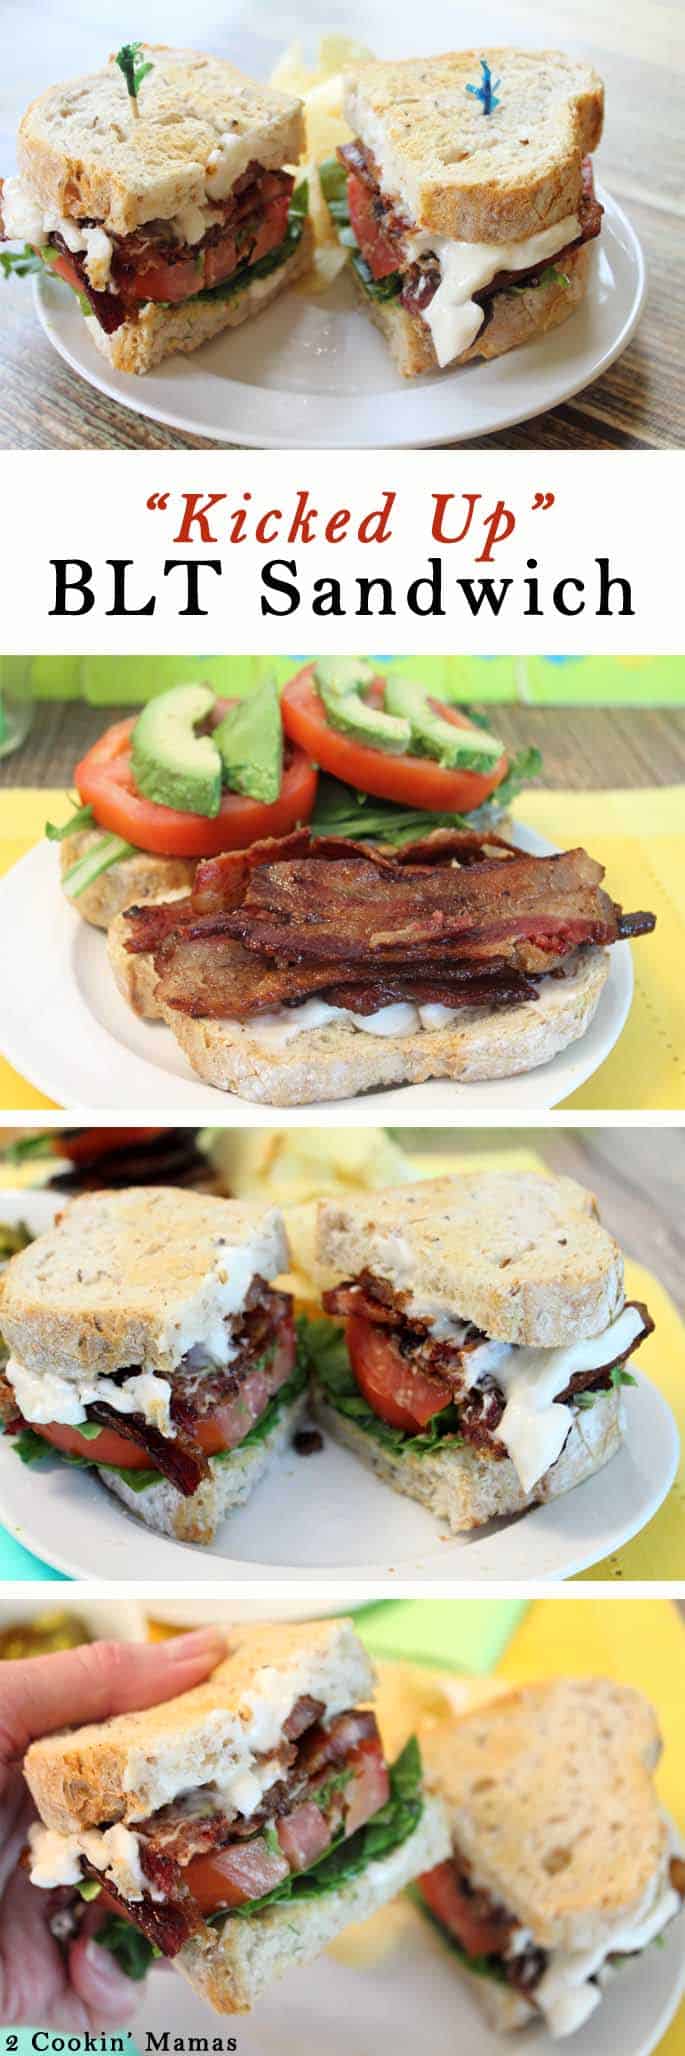 Kicked Up BLT Sandwich | 2 Cookin Mamas A BLT with a little something extra - jalapeno bacon! Dress it with bacon mayo, arugula, plump juicy tomatoes and avocado & you've got yourself one unforgettable BLT sandwich!